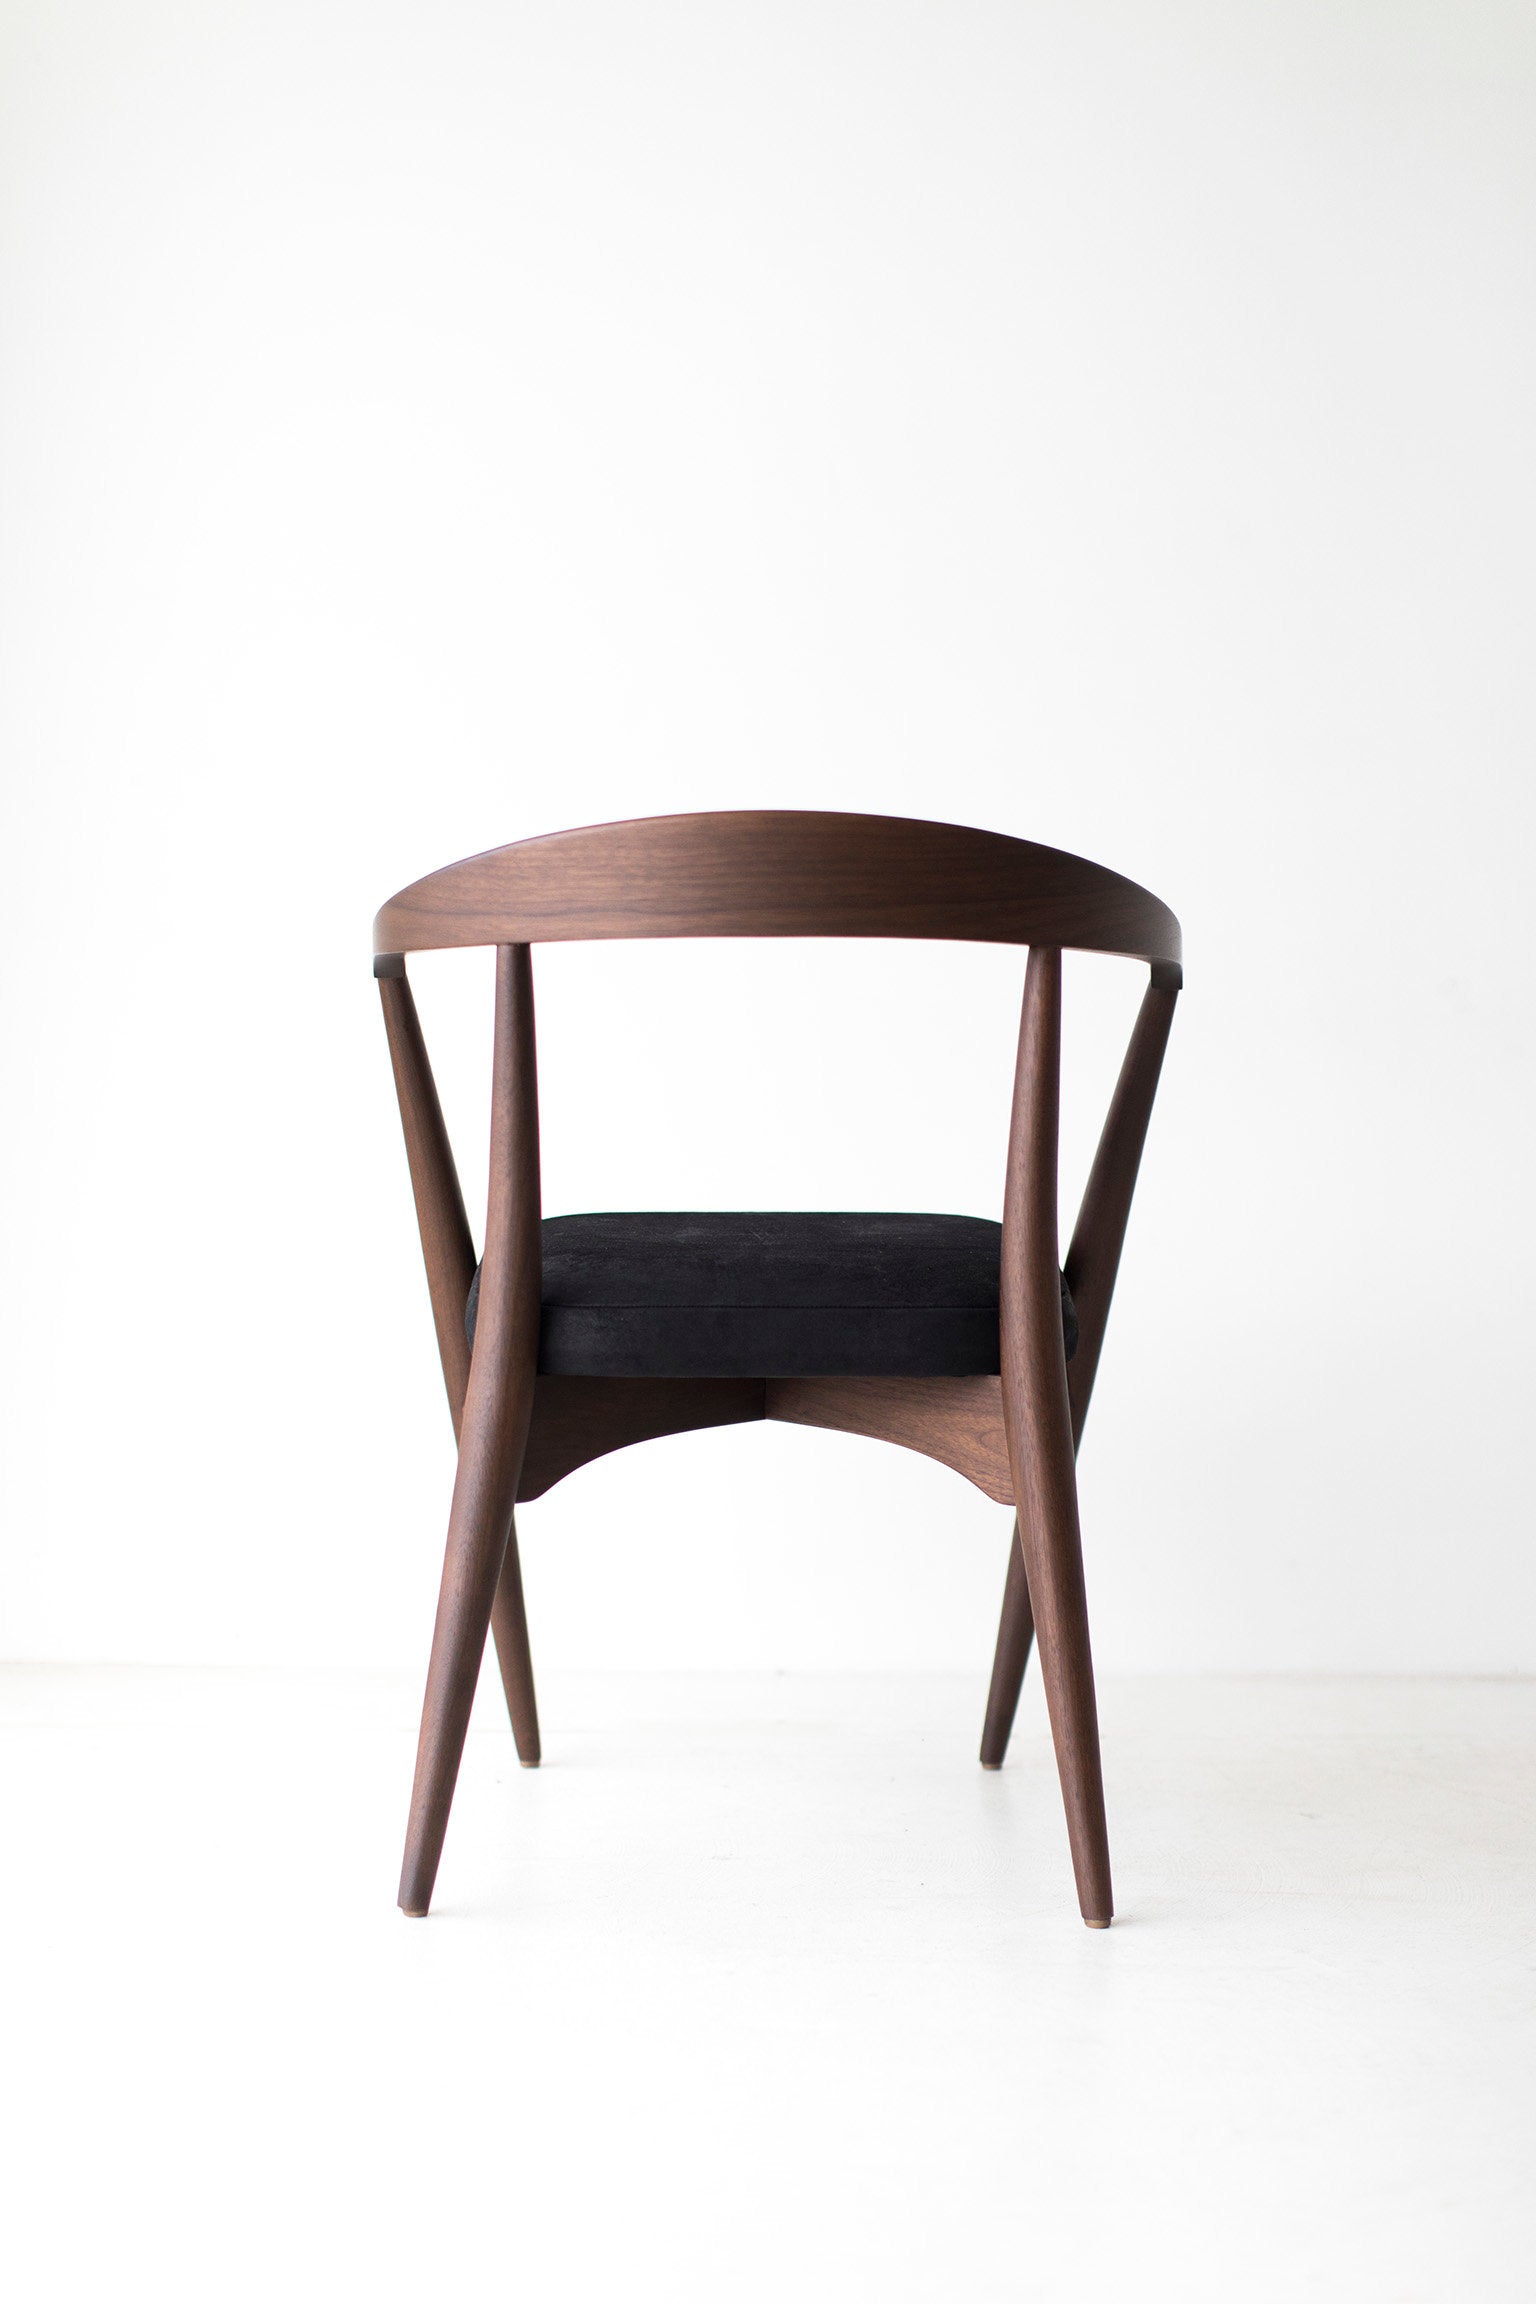 Lawrence Peabody Dining Chairs - P-1708 - Craft Associates® Furniture